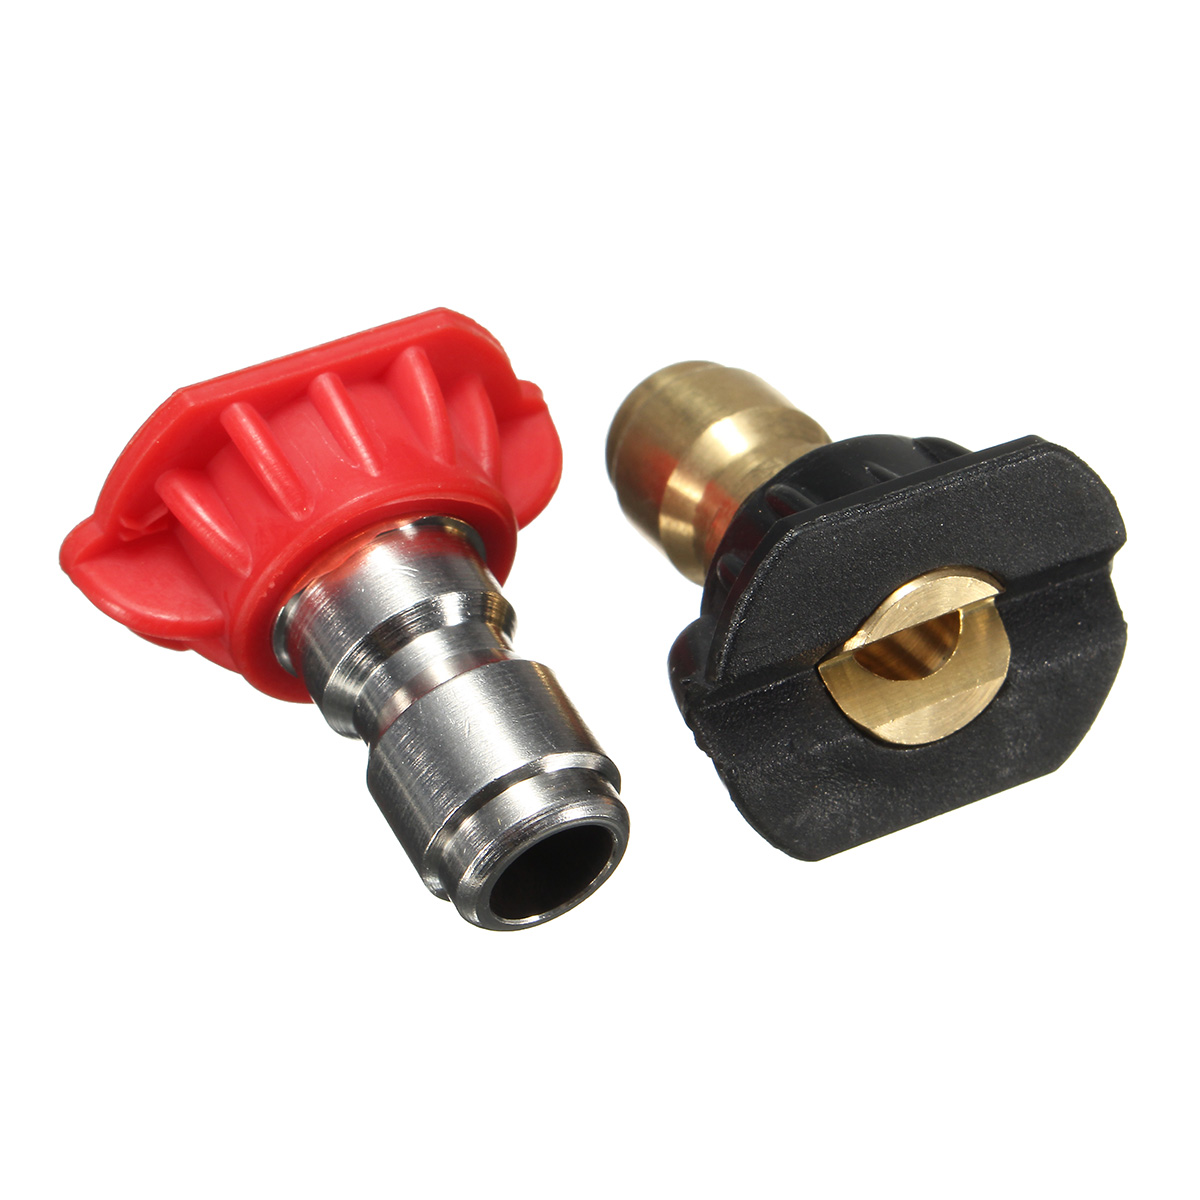 3000PSI-High-Pressure-Water-Gun-Adapter-With-5pcs-Nozzles-for-High-Pressure-Water-Cleaner-1130889-6